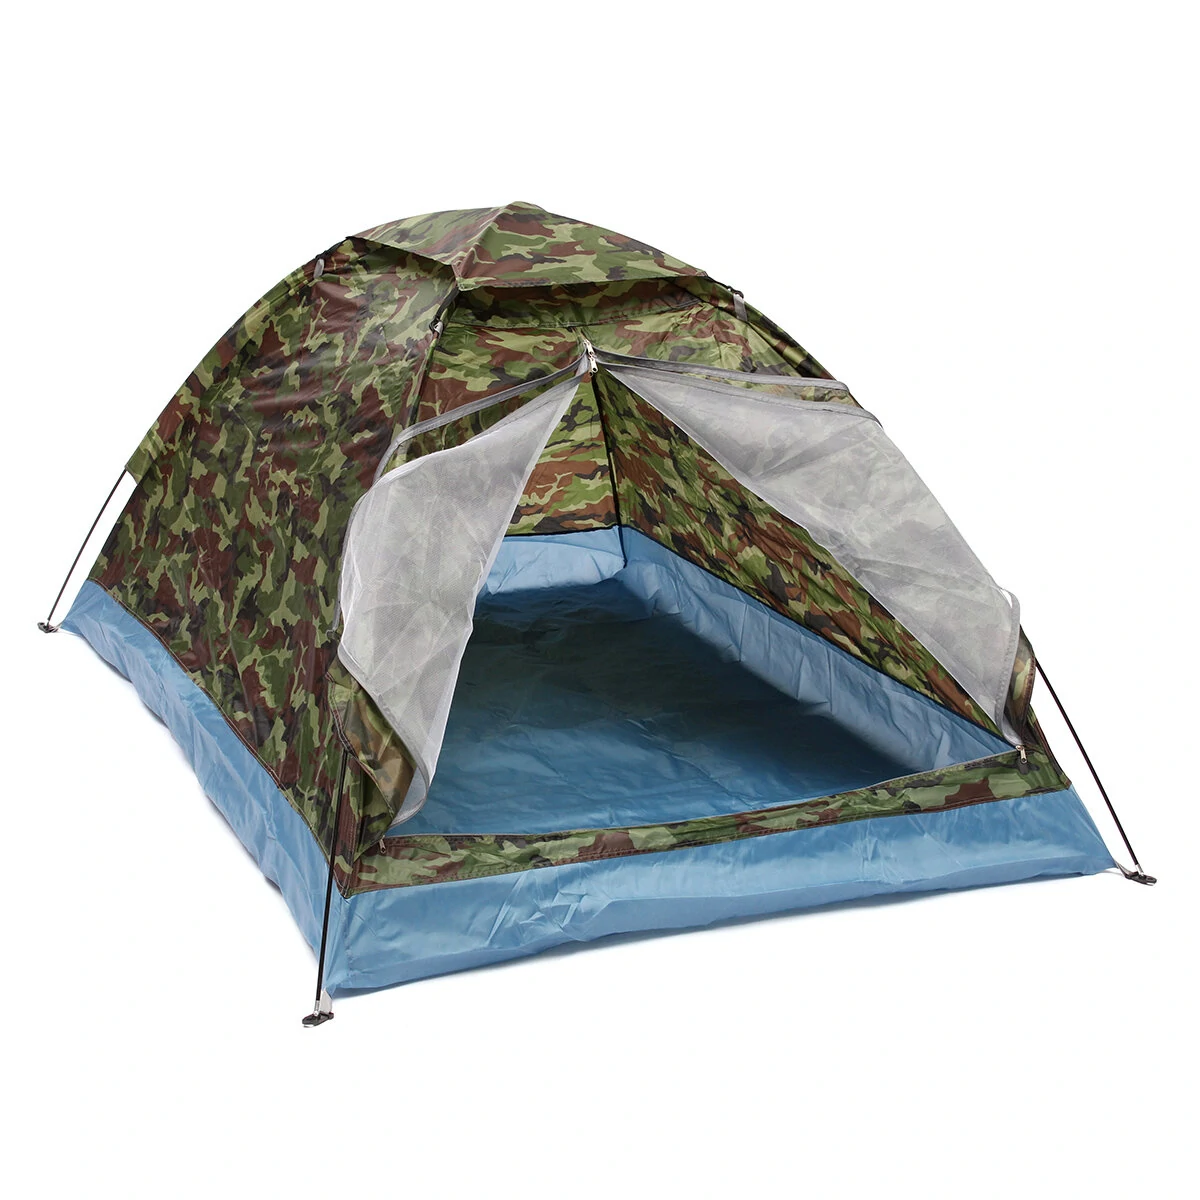 Outdoor 1-2 Persons Camping Tent Waterproof Windproof UV Sunshade Canopy